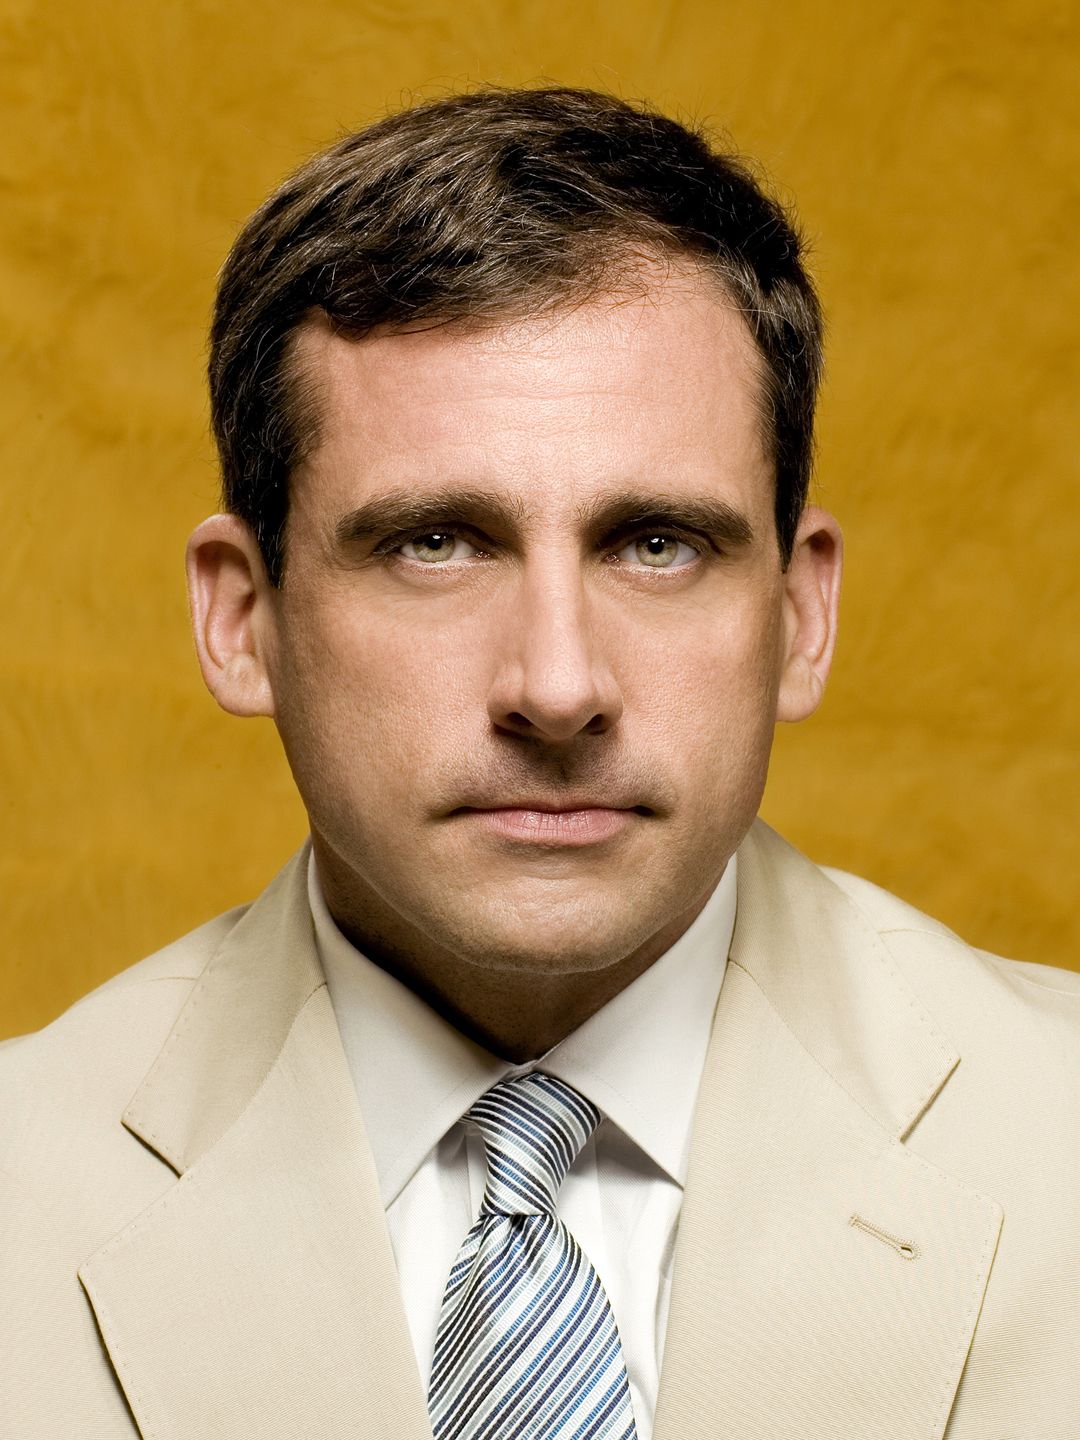 Steve Carell does he have a wife